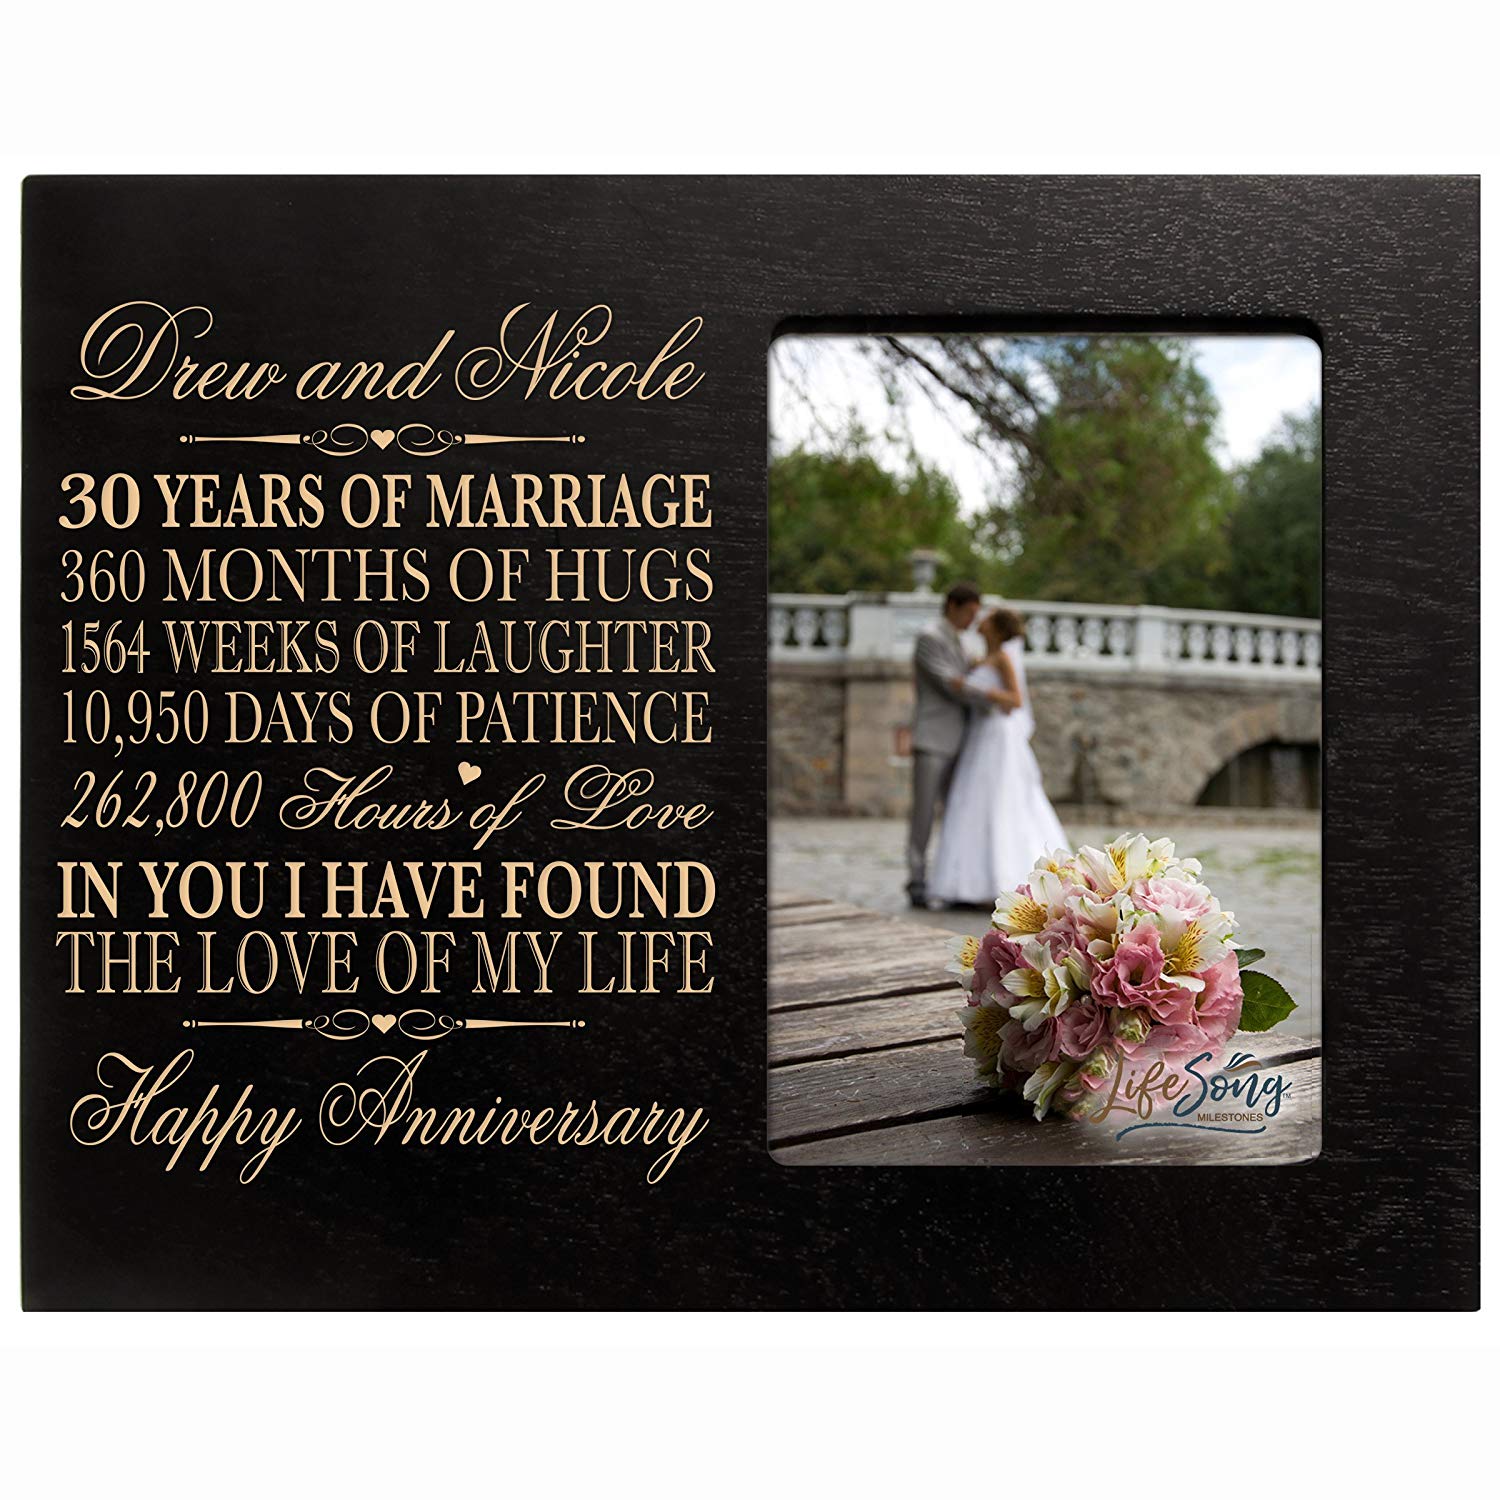 Personalized Couples 30th Wedding Anniversary Picture Frame Decorations - In You I Have Found - LifeSong Milestones